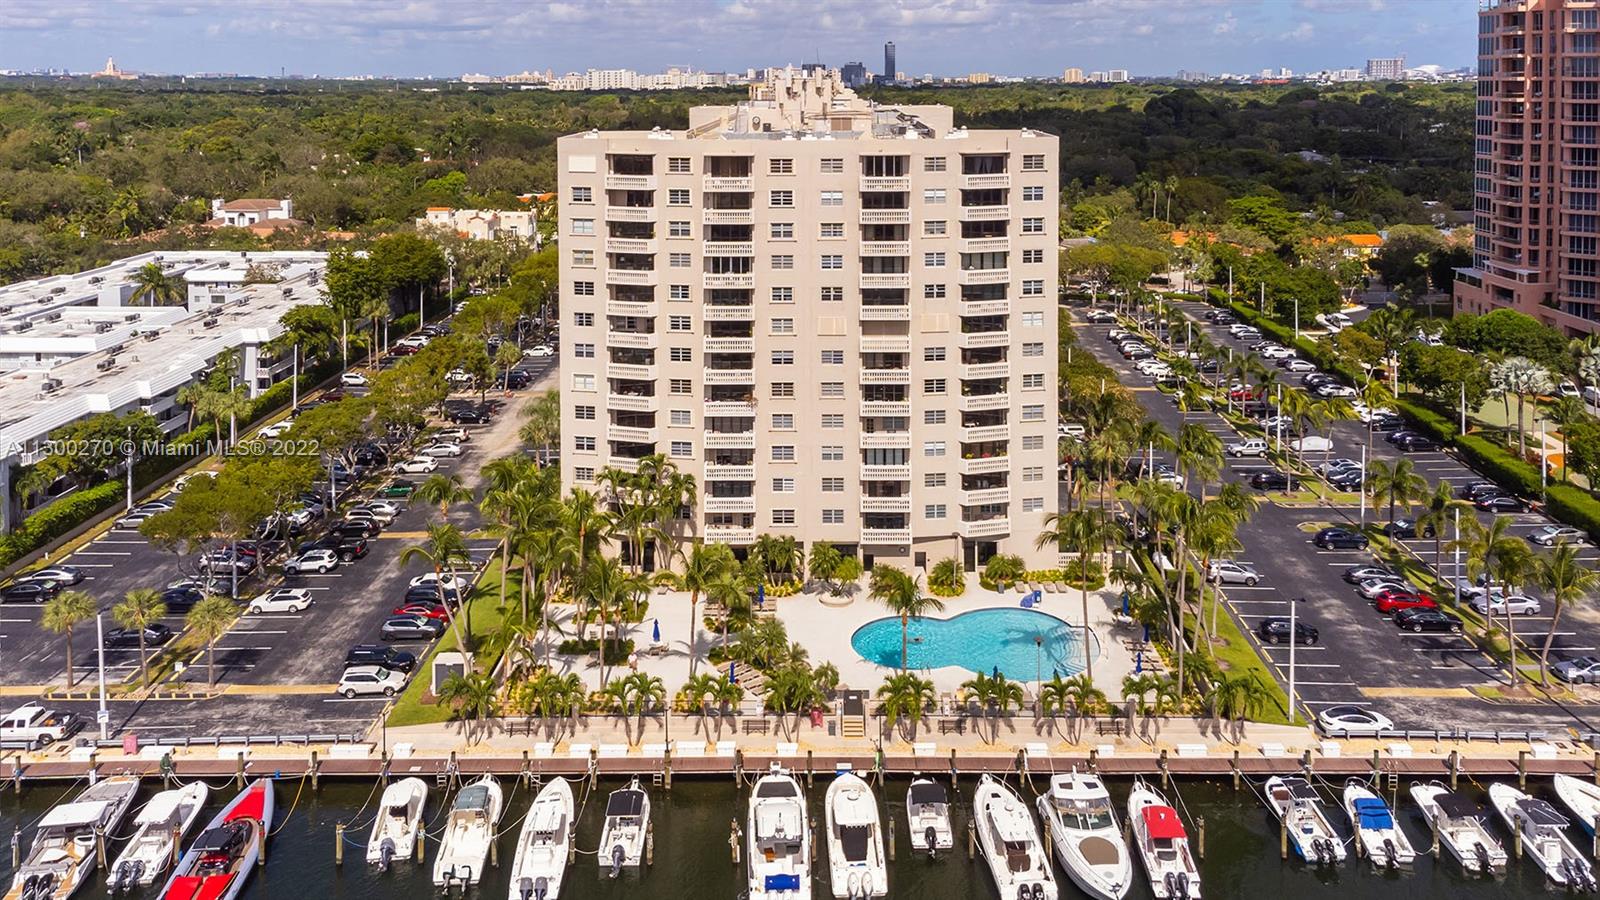 Spectacularly updated unit at prestigious 90 Edgewater Dr. Gables Waterway Towers provides 24/7 valet & security w/ doorman services. Amenities include Heated Pool, Gym, and Game/Party Rooms. HOA includes electricity for AC, Basic Cable, Water, and Building Insurance. Washer & Dryer inside unit. The building recently finished an $8.5M renovation and received their 40 & 50 year Miami Dade Recertification improvements for mechanical and safety code updates. 1 assigned parking space. Close proximity to the heart of Coconut Grove, UM, Downtown Coral Gables, and Airport.